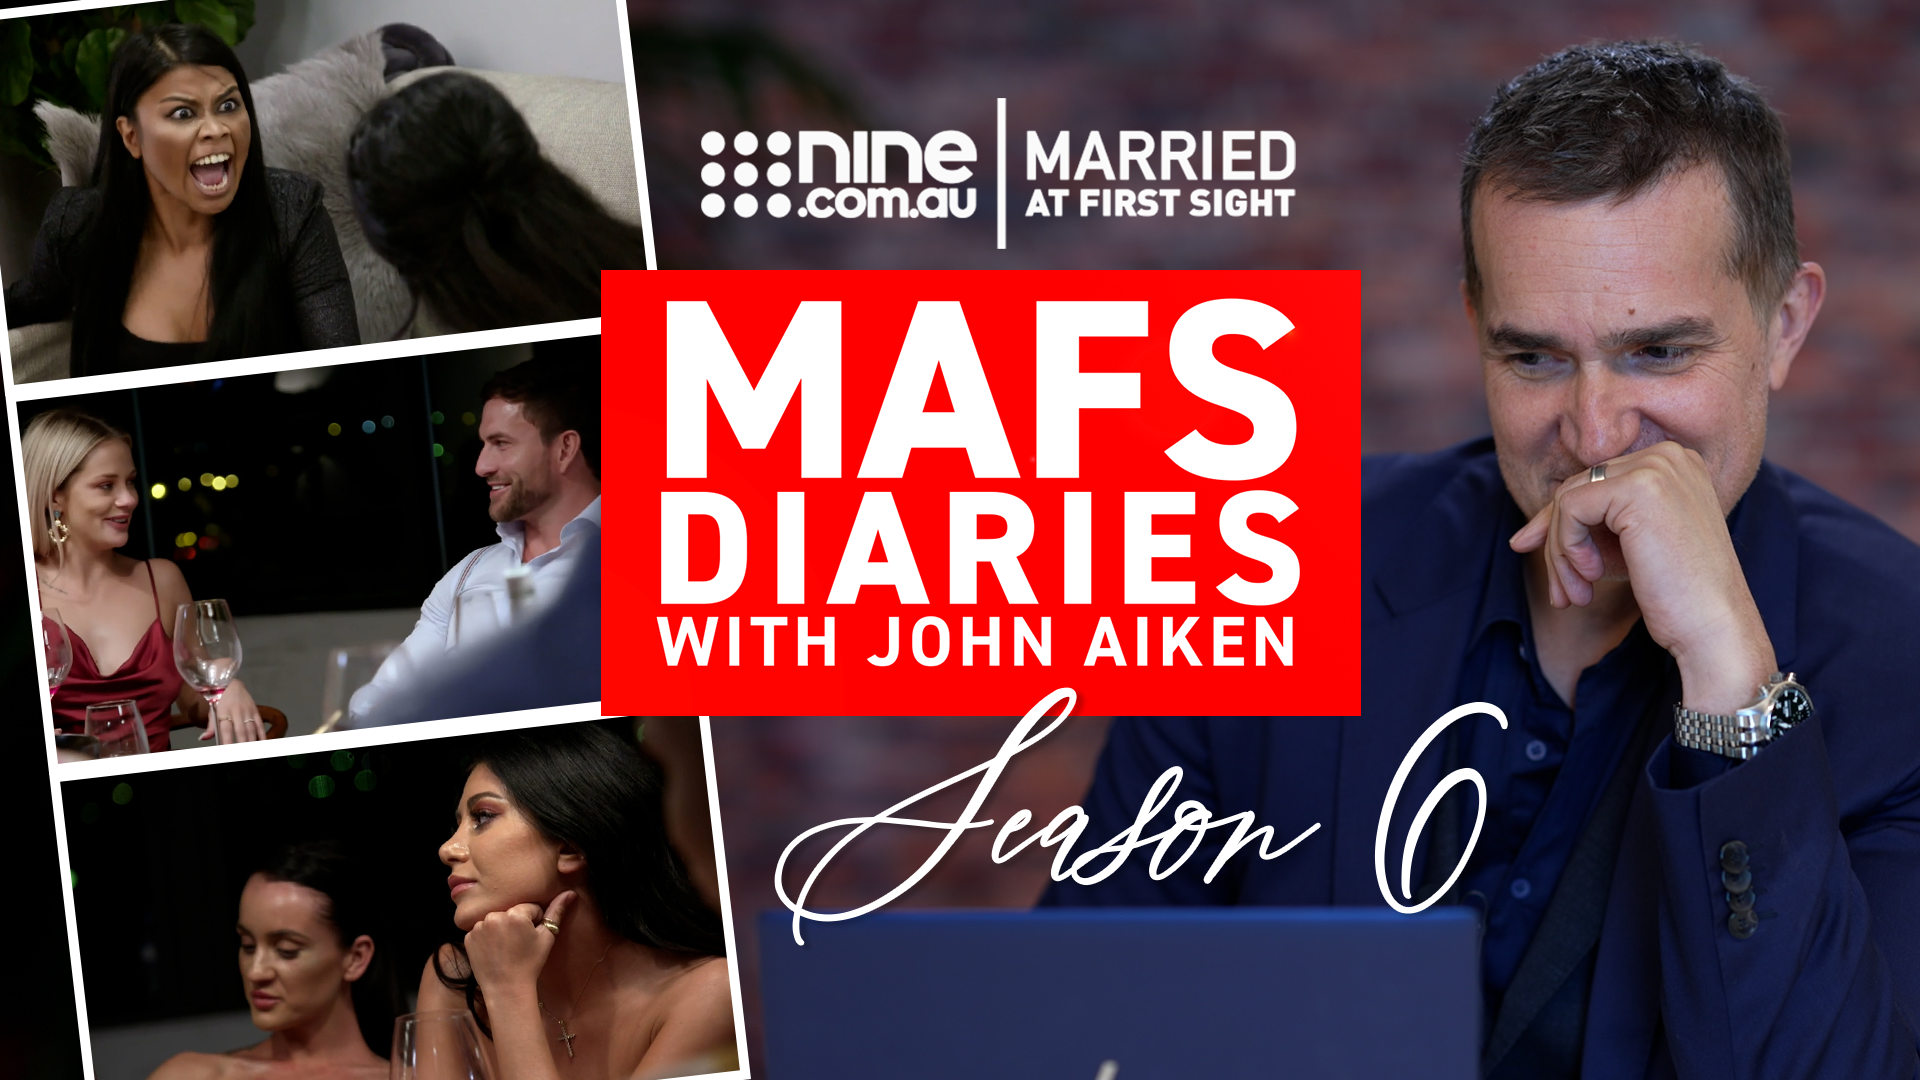 The MAFS Diaries with John Aiken Episode 6: Expert reflects on 'most iconic' moment in show history